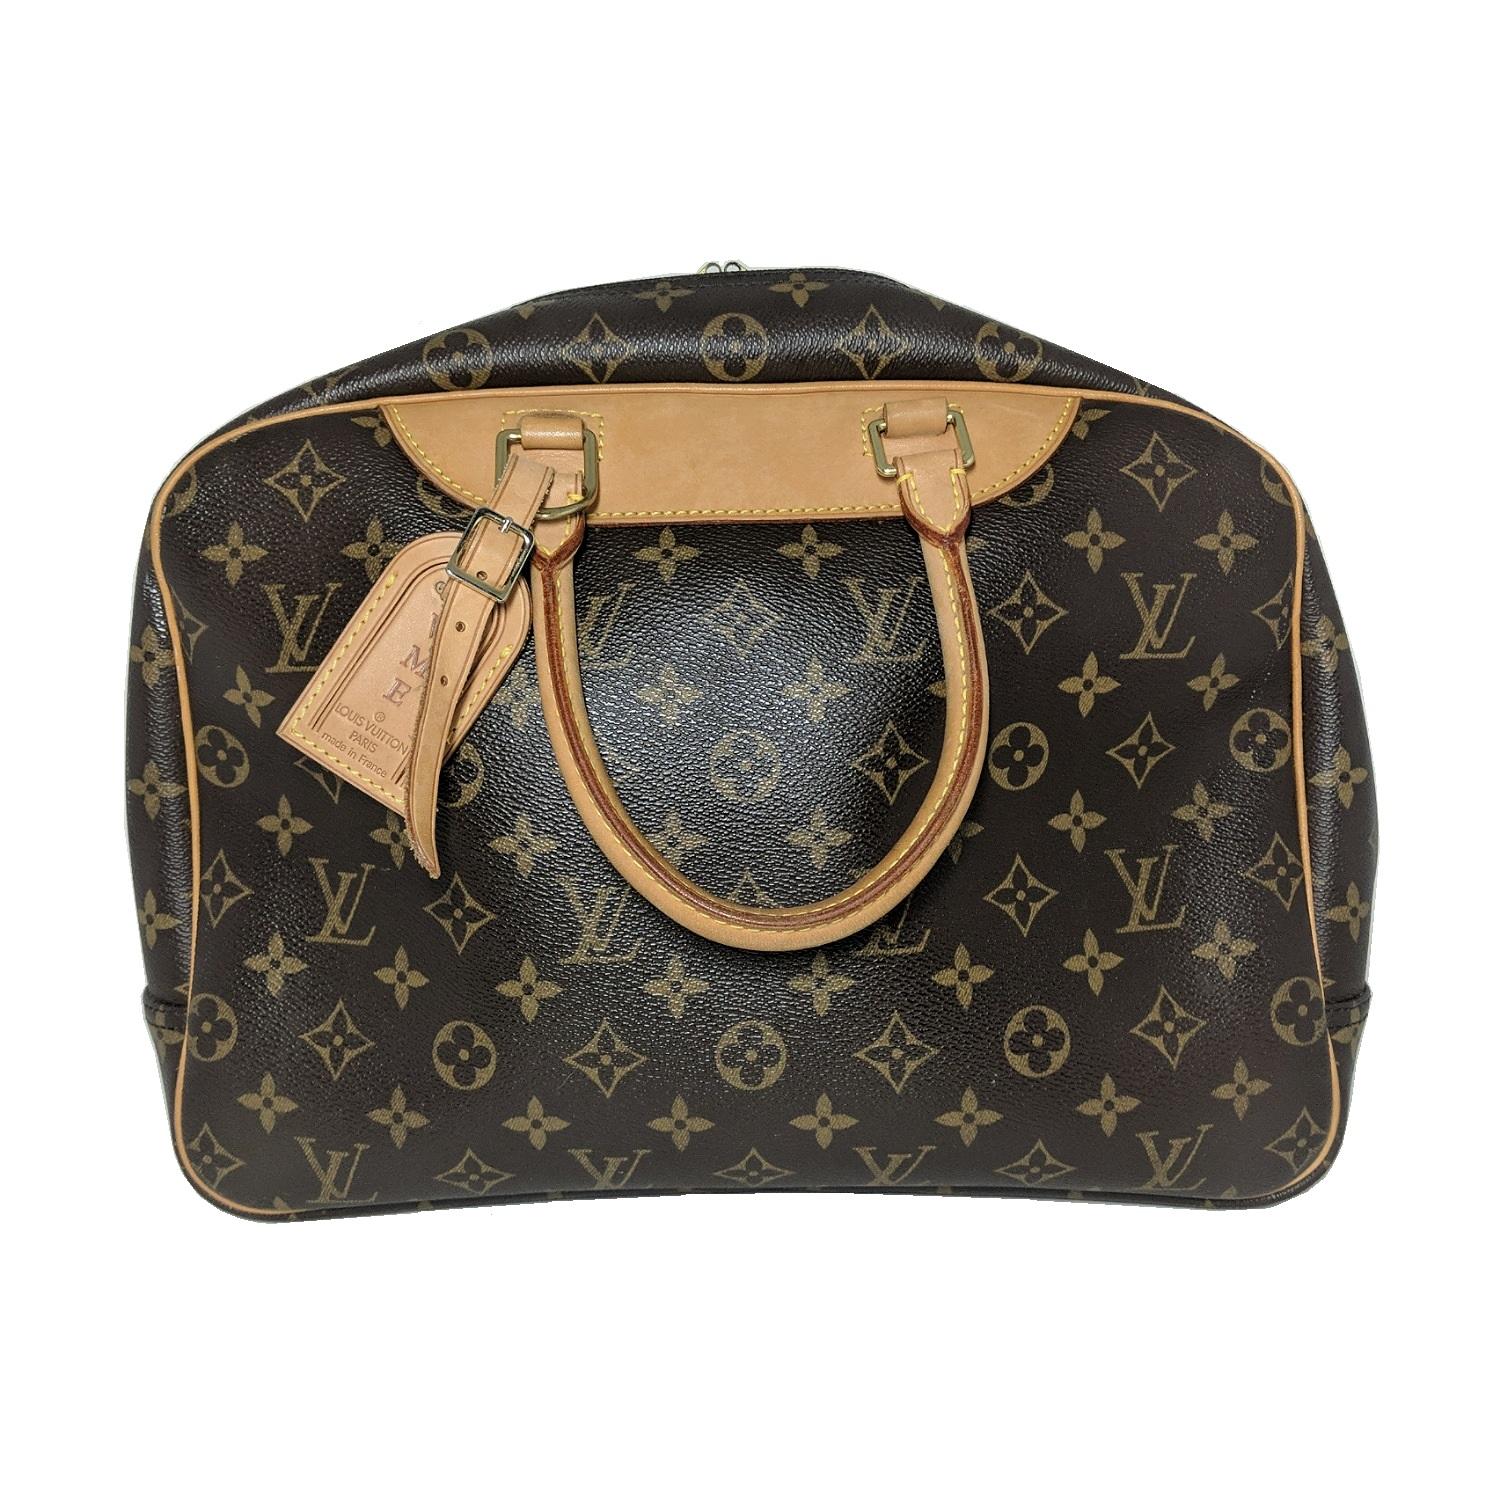 This Louis Vuitton Monogram Deaville Canvas Bowling bag, is crafted from brown and tan monogram coated canvas, features dual rolled top handles, cowhide leather trim, and brass hardware. Its two-way zip-around closure opens to a beige canvas lining